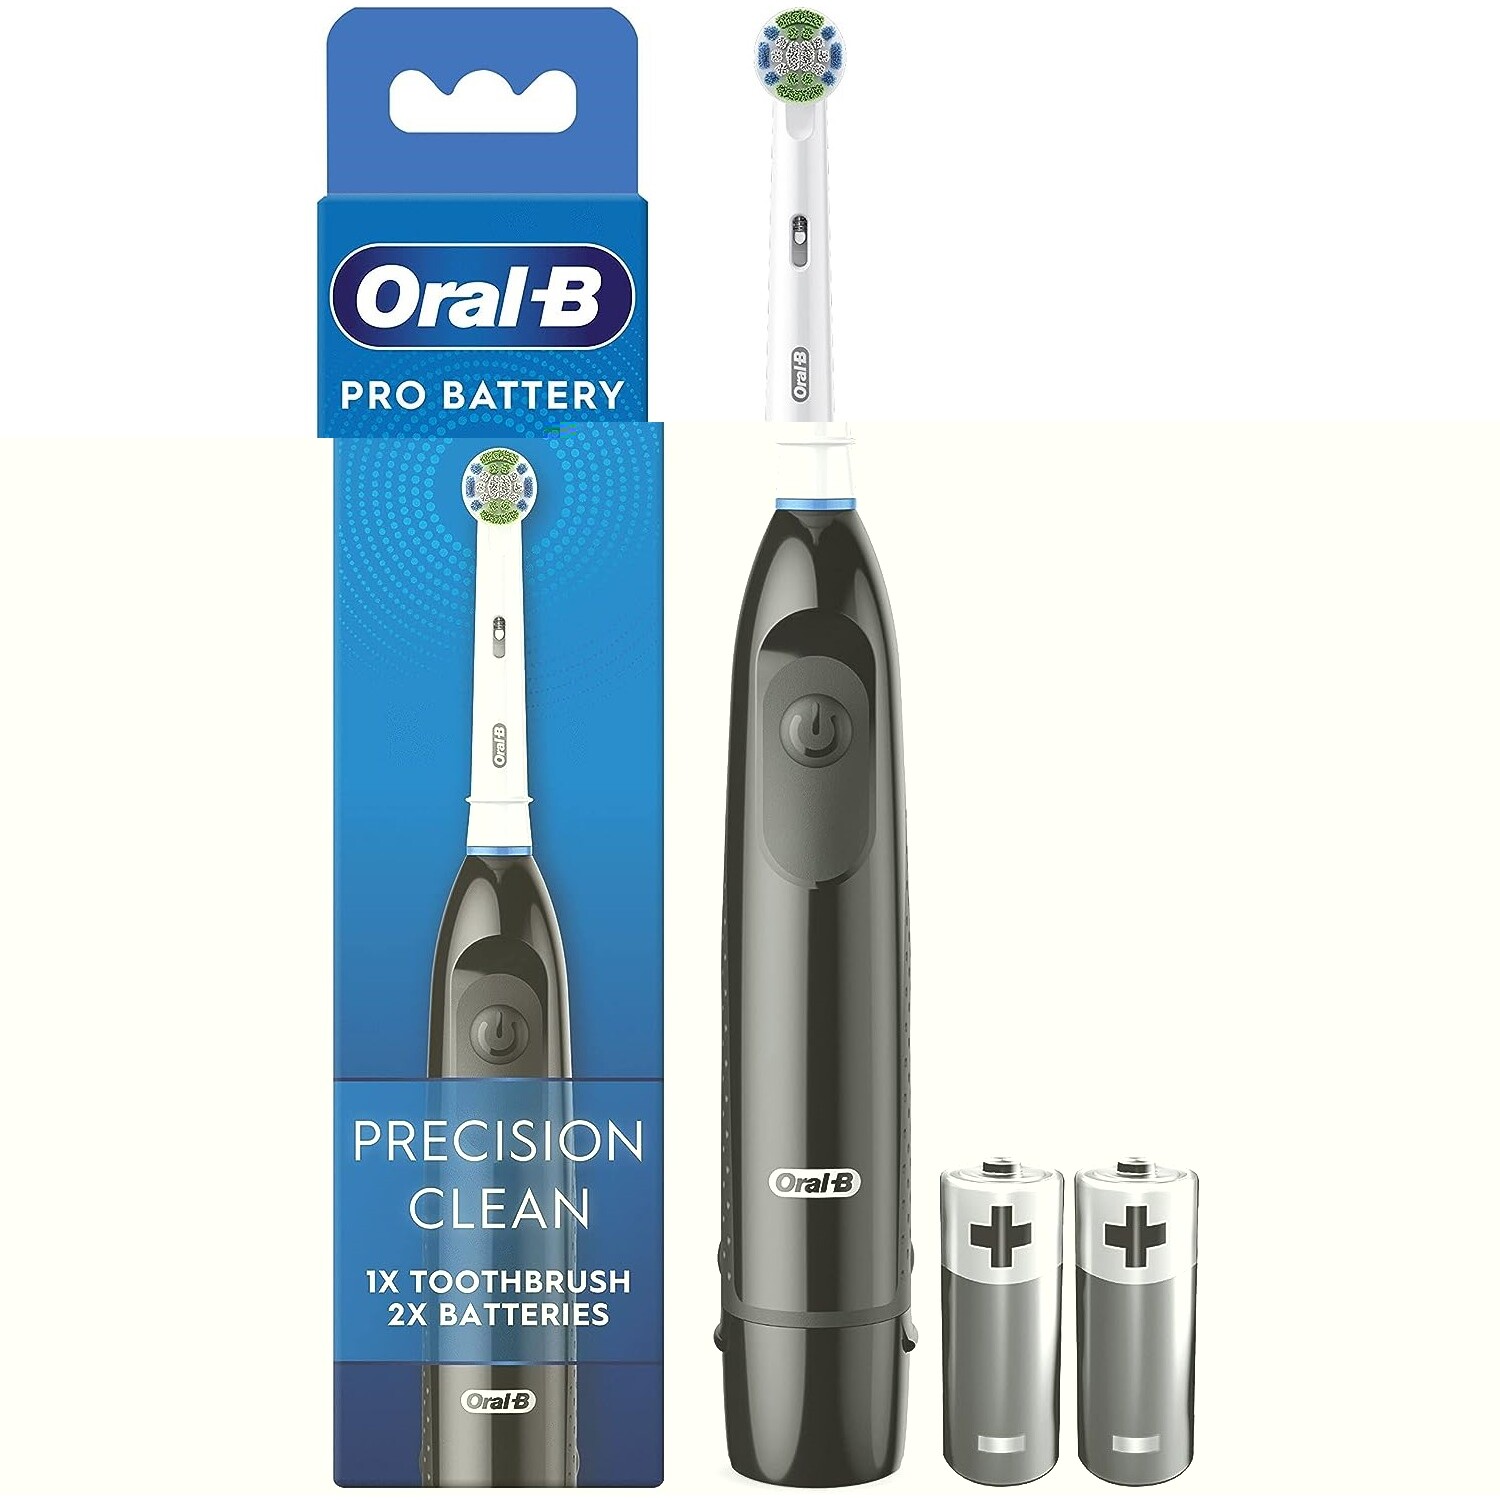 Oral-B Precision Clean Battery Powered Toothbrush Image